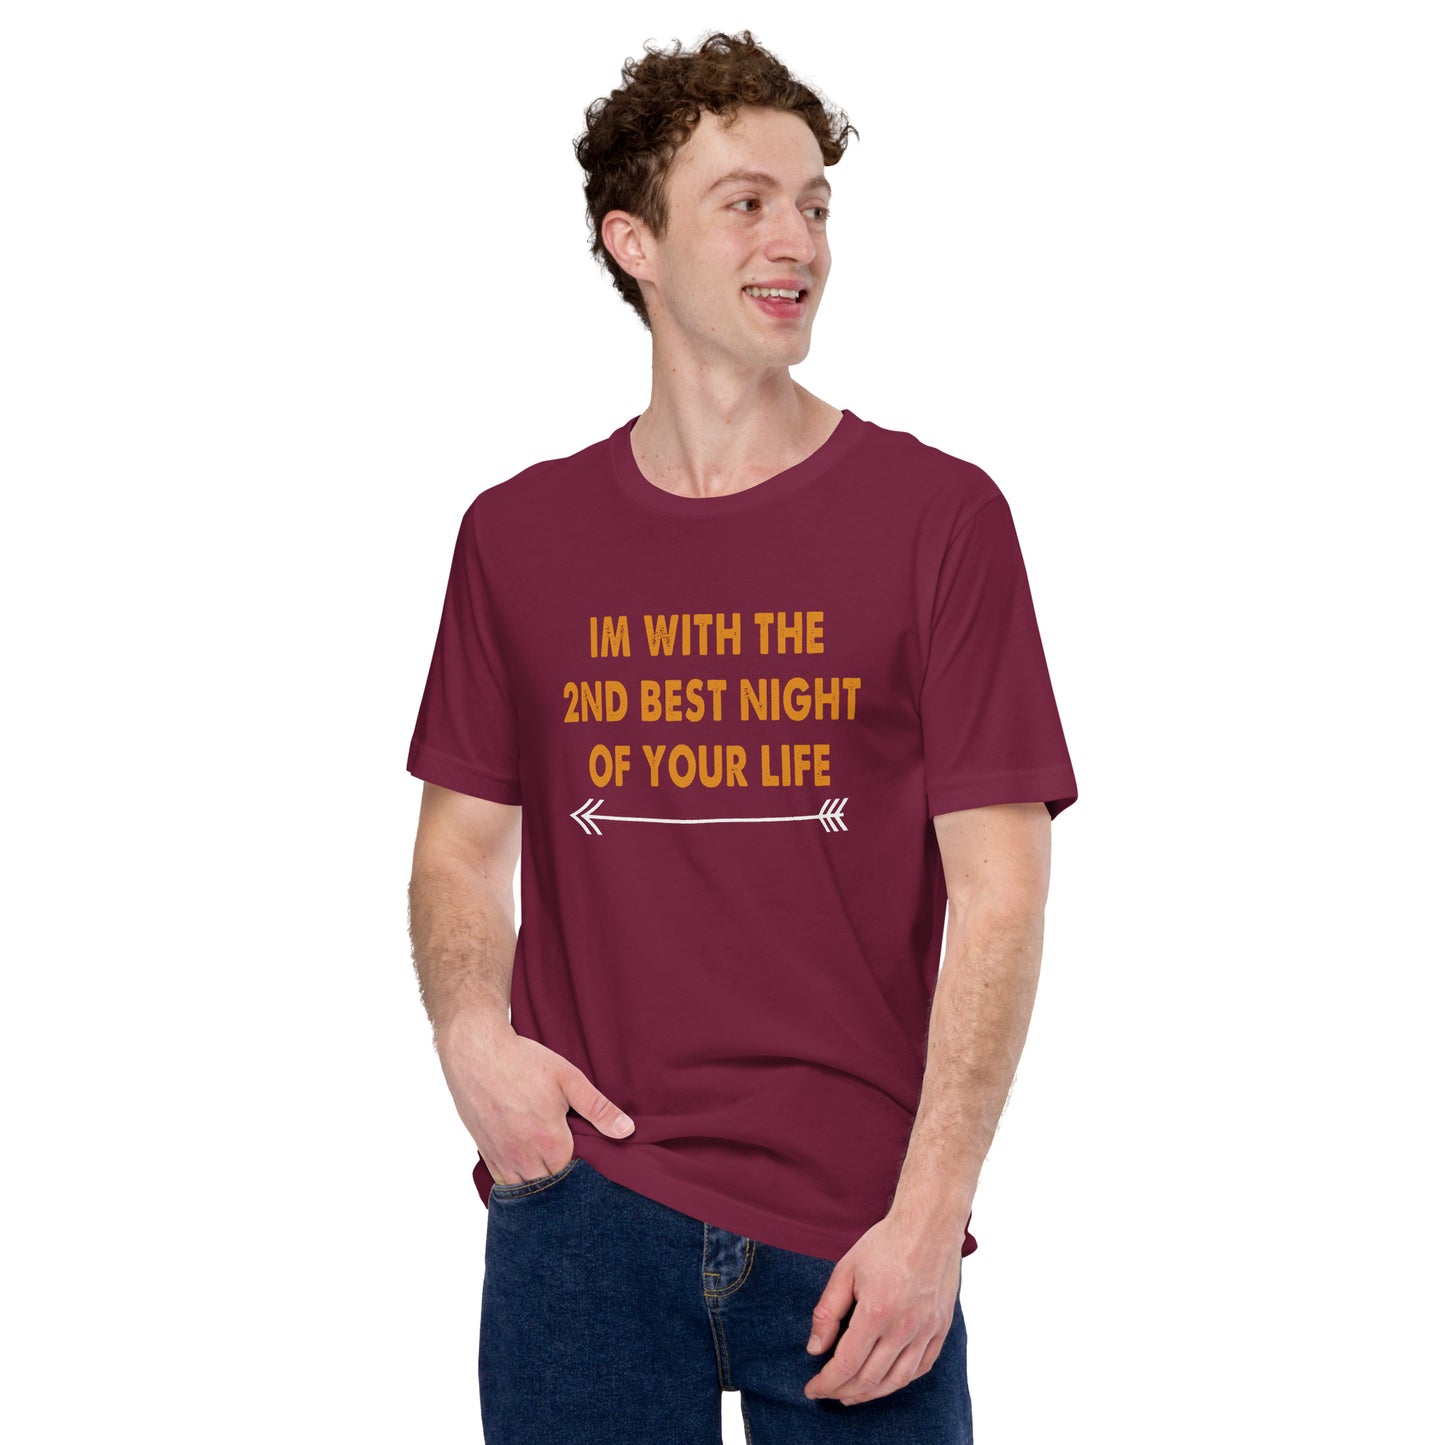 I am with the 2nd best night of your life Unisex t-shirt